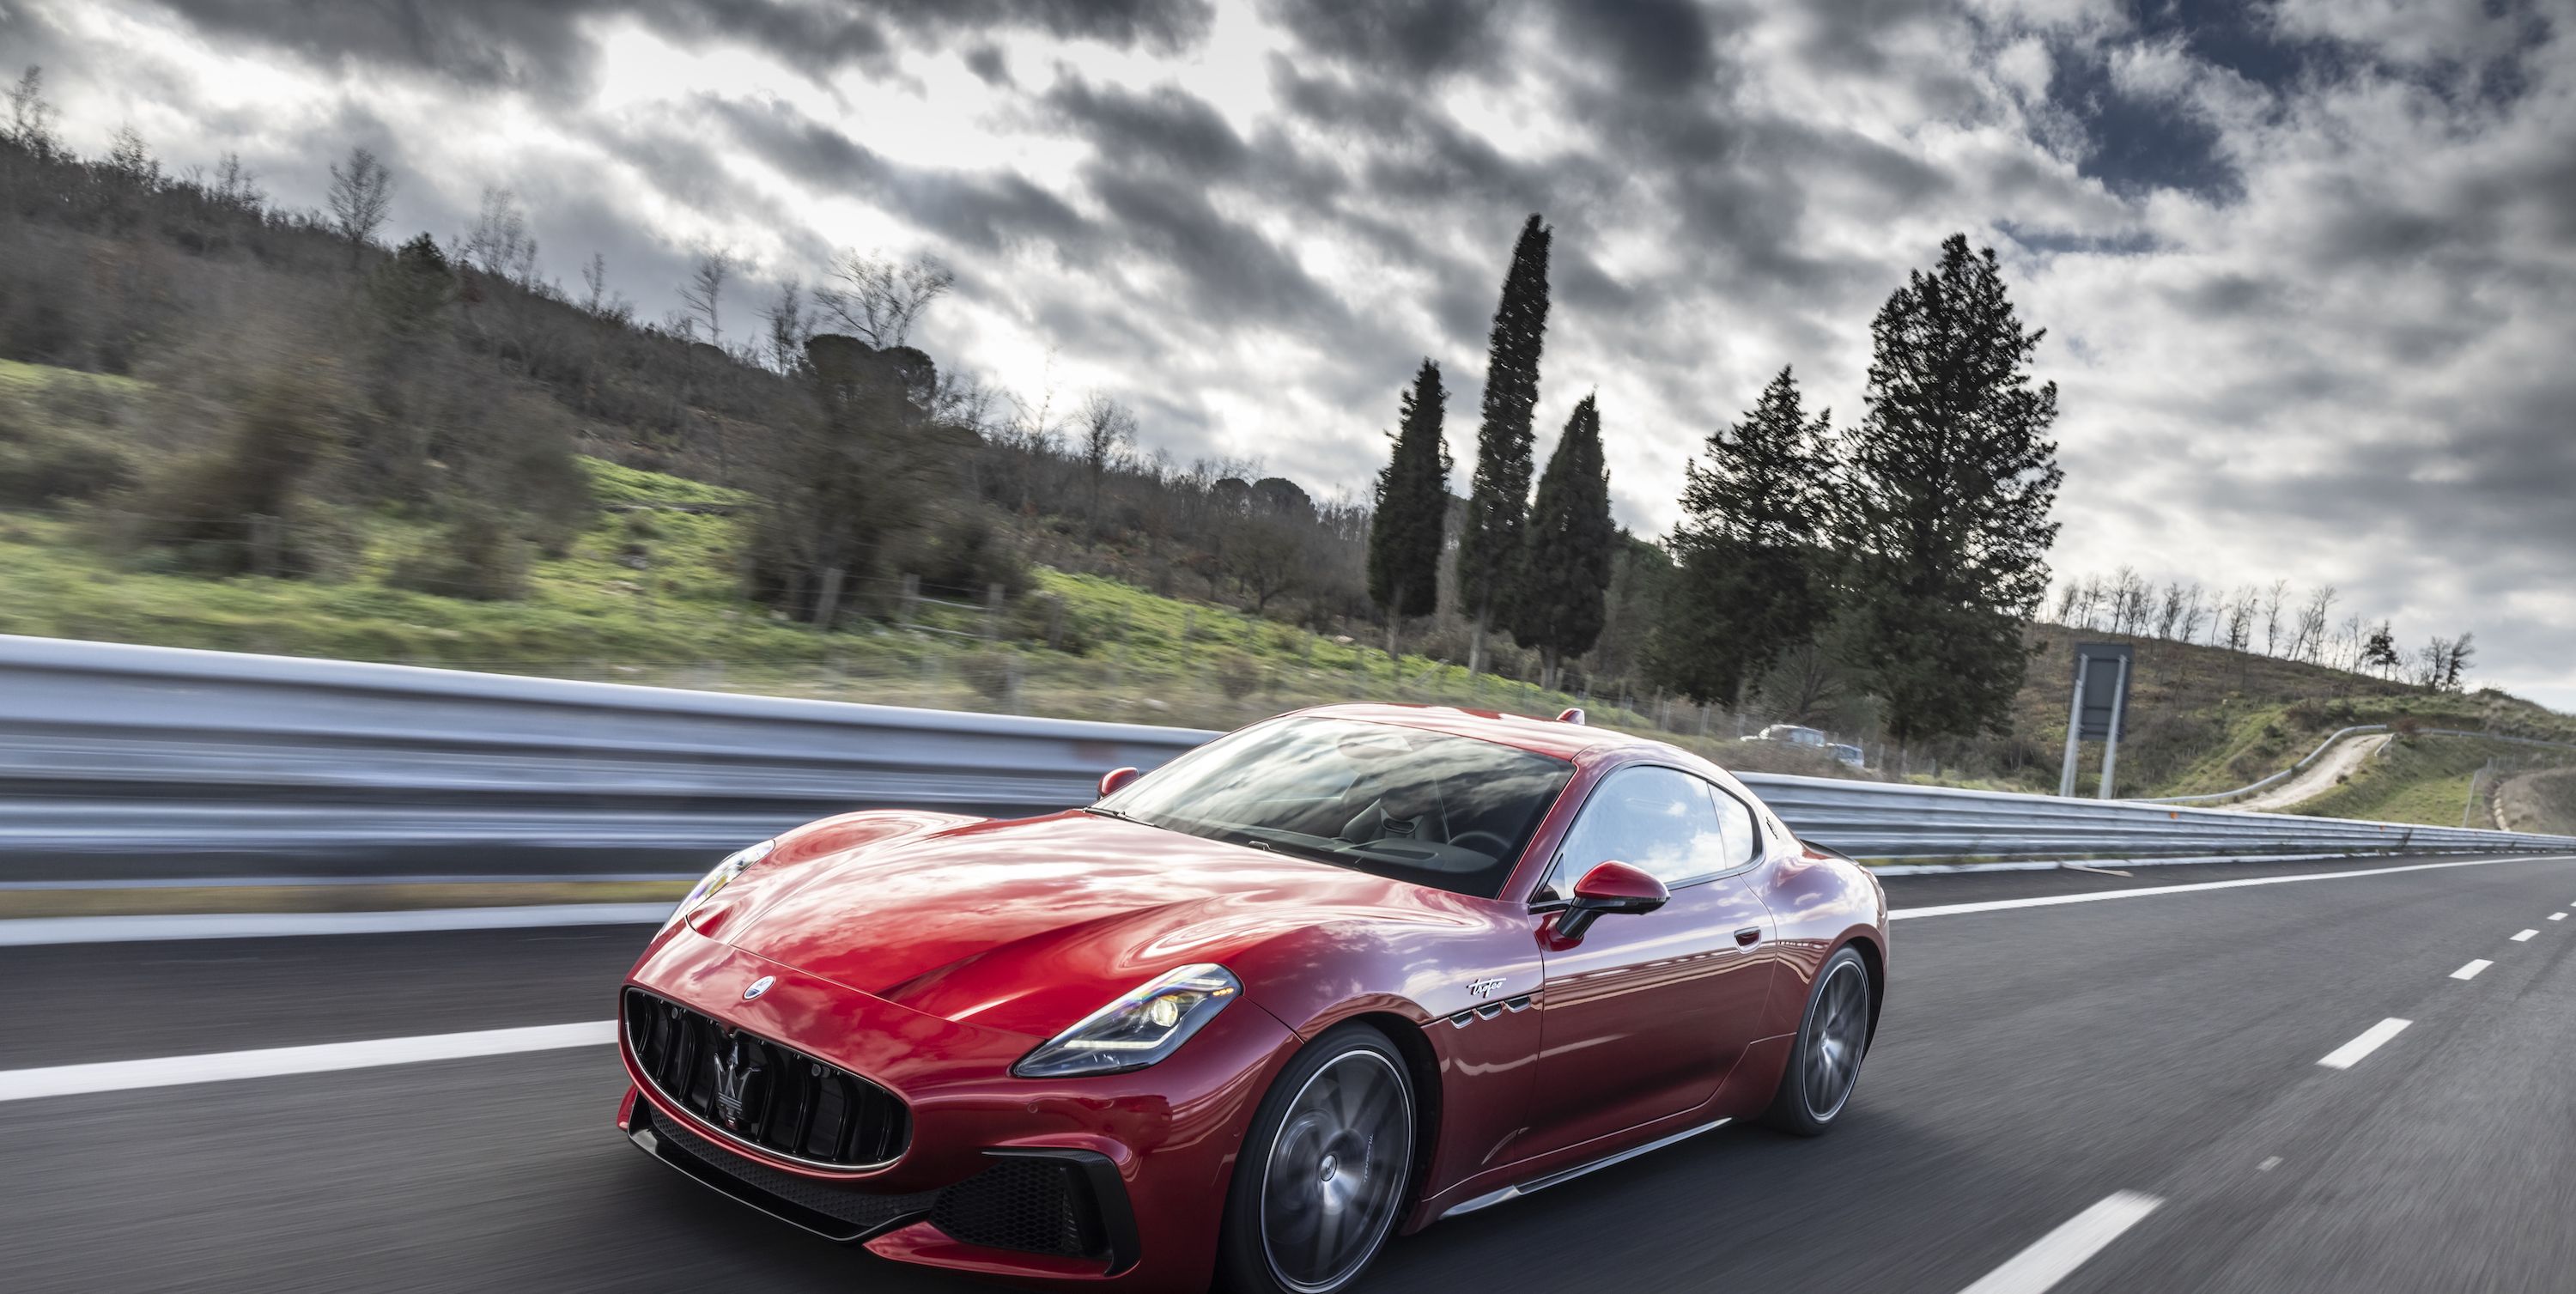 The Maserati GranTurismo Is an Unexpected Shock of Lightning